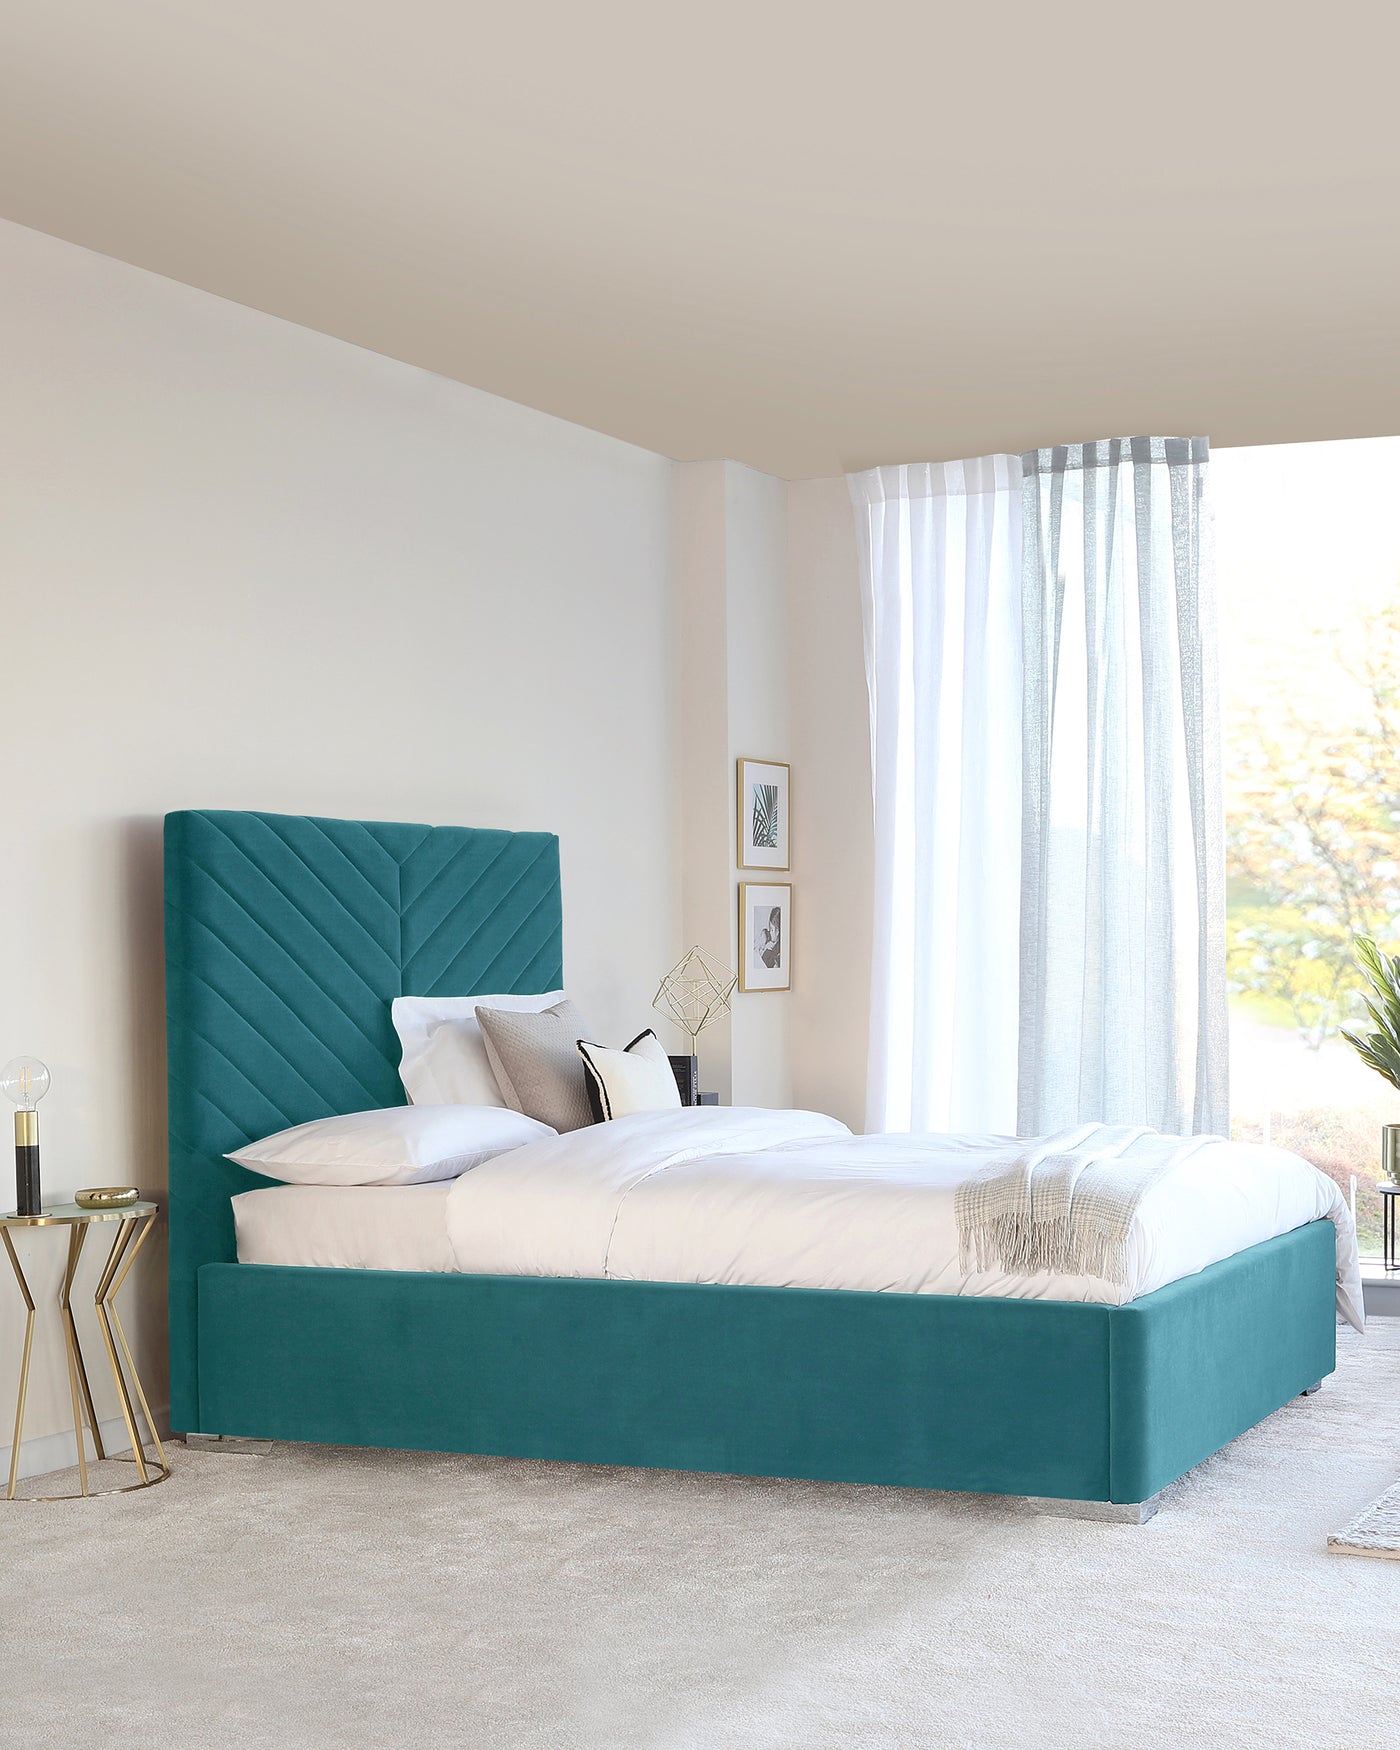 Elegant teal upholstered bed with a tall, tufted headboard, paired with a brass and glass circular side table.